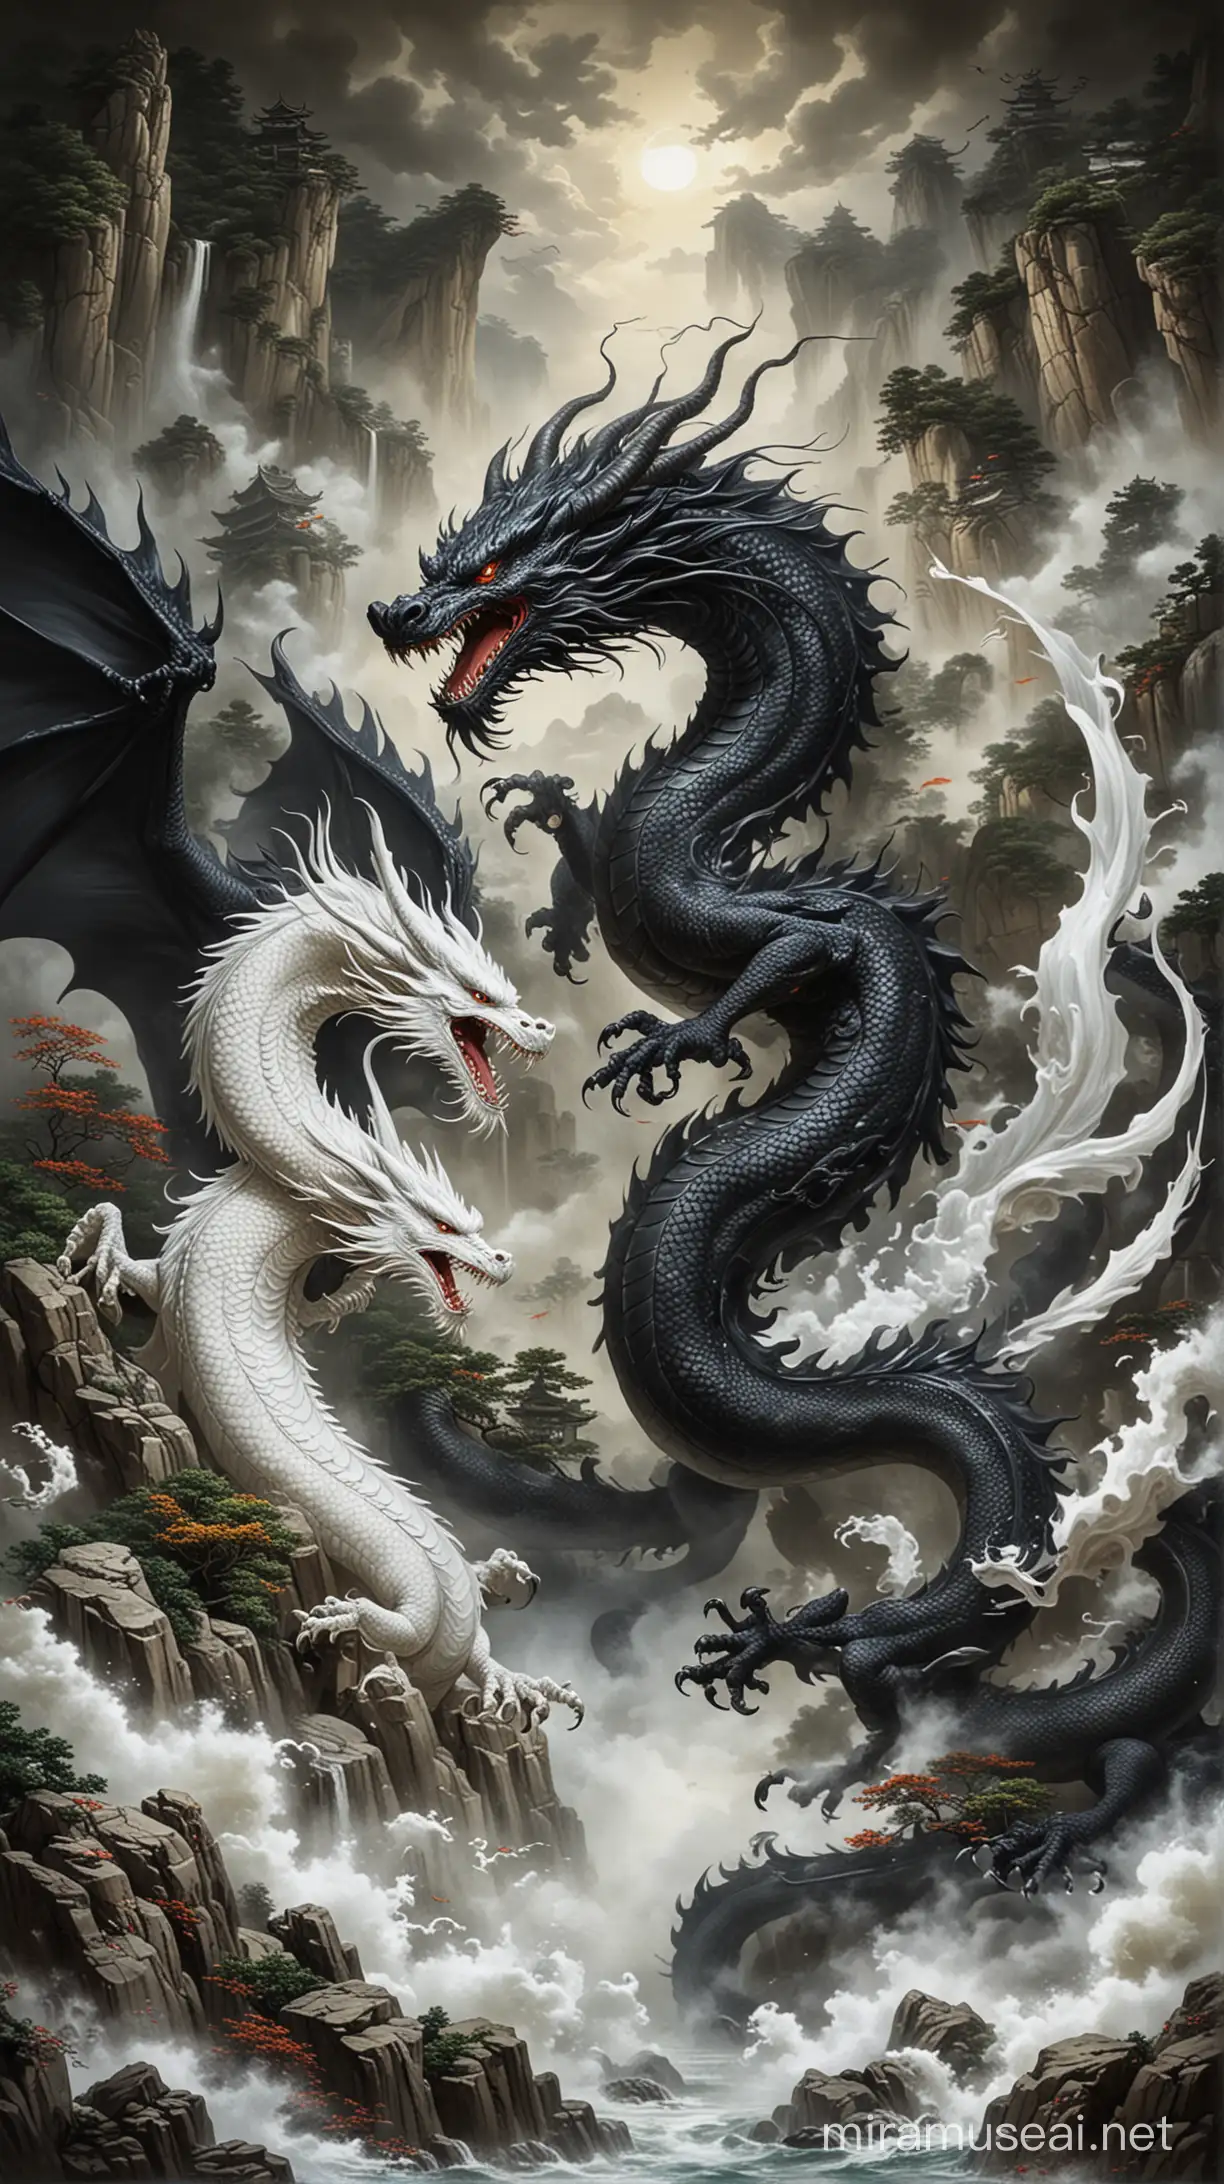 Dual Dragon Confrontation in Traditional Chinese Art Style